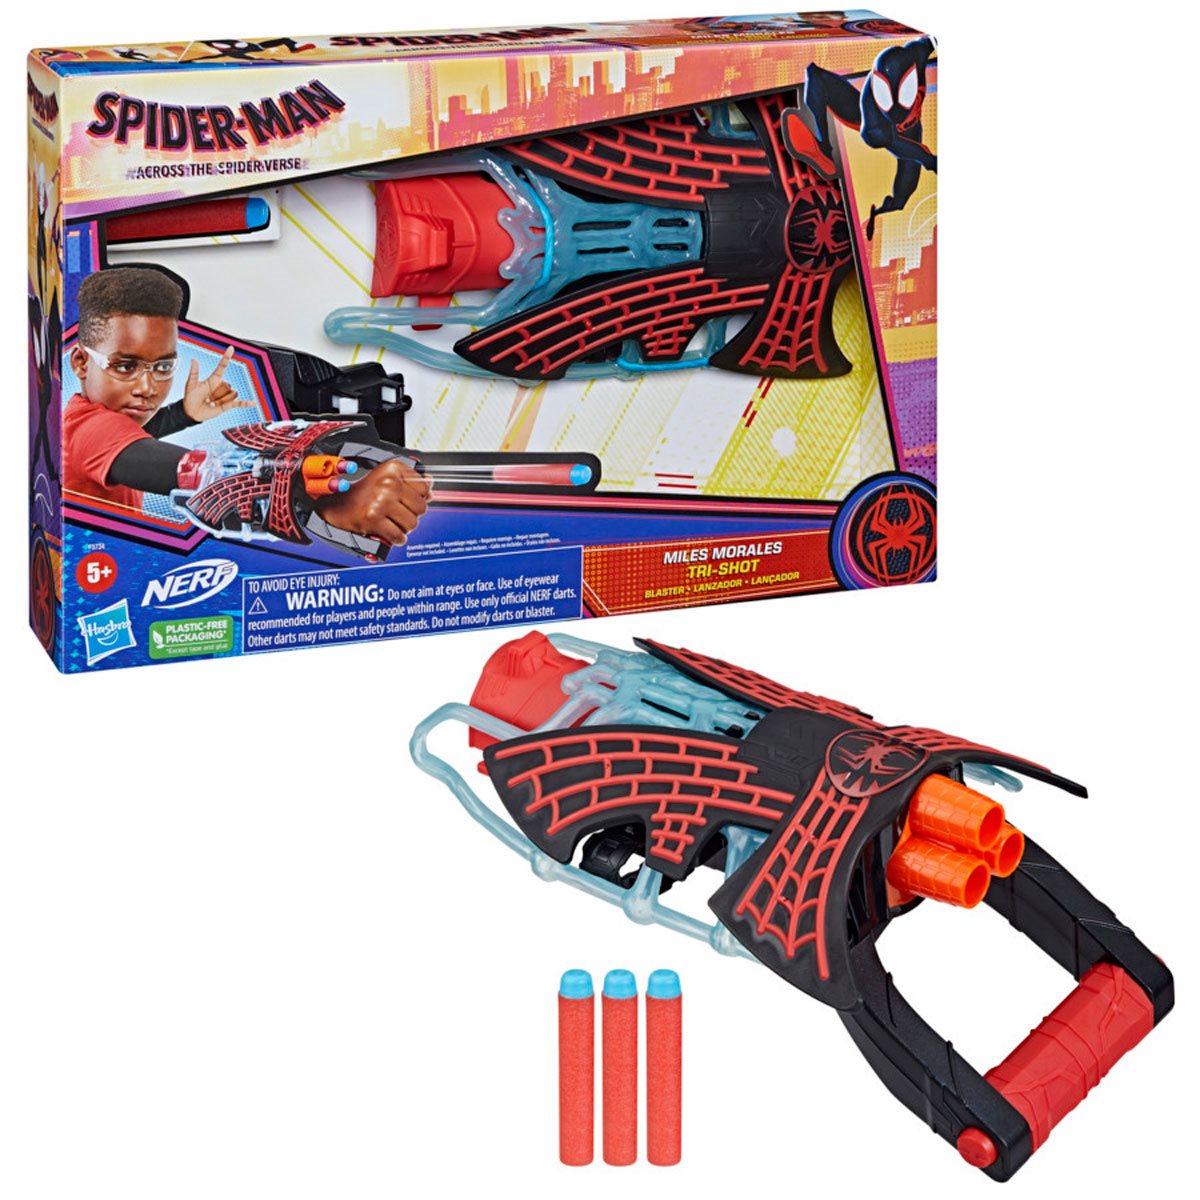 Spider-Man: Across the Spider-Verse NERF Miles Morales Tri-Shot